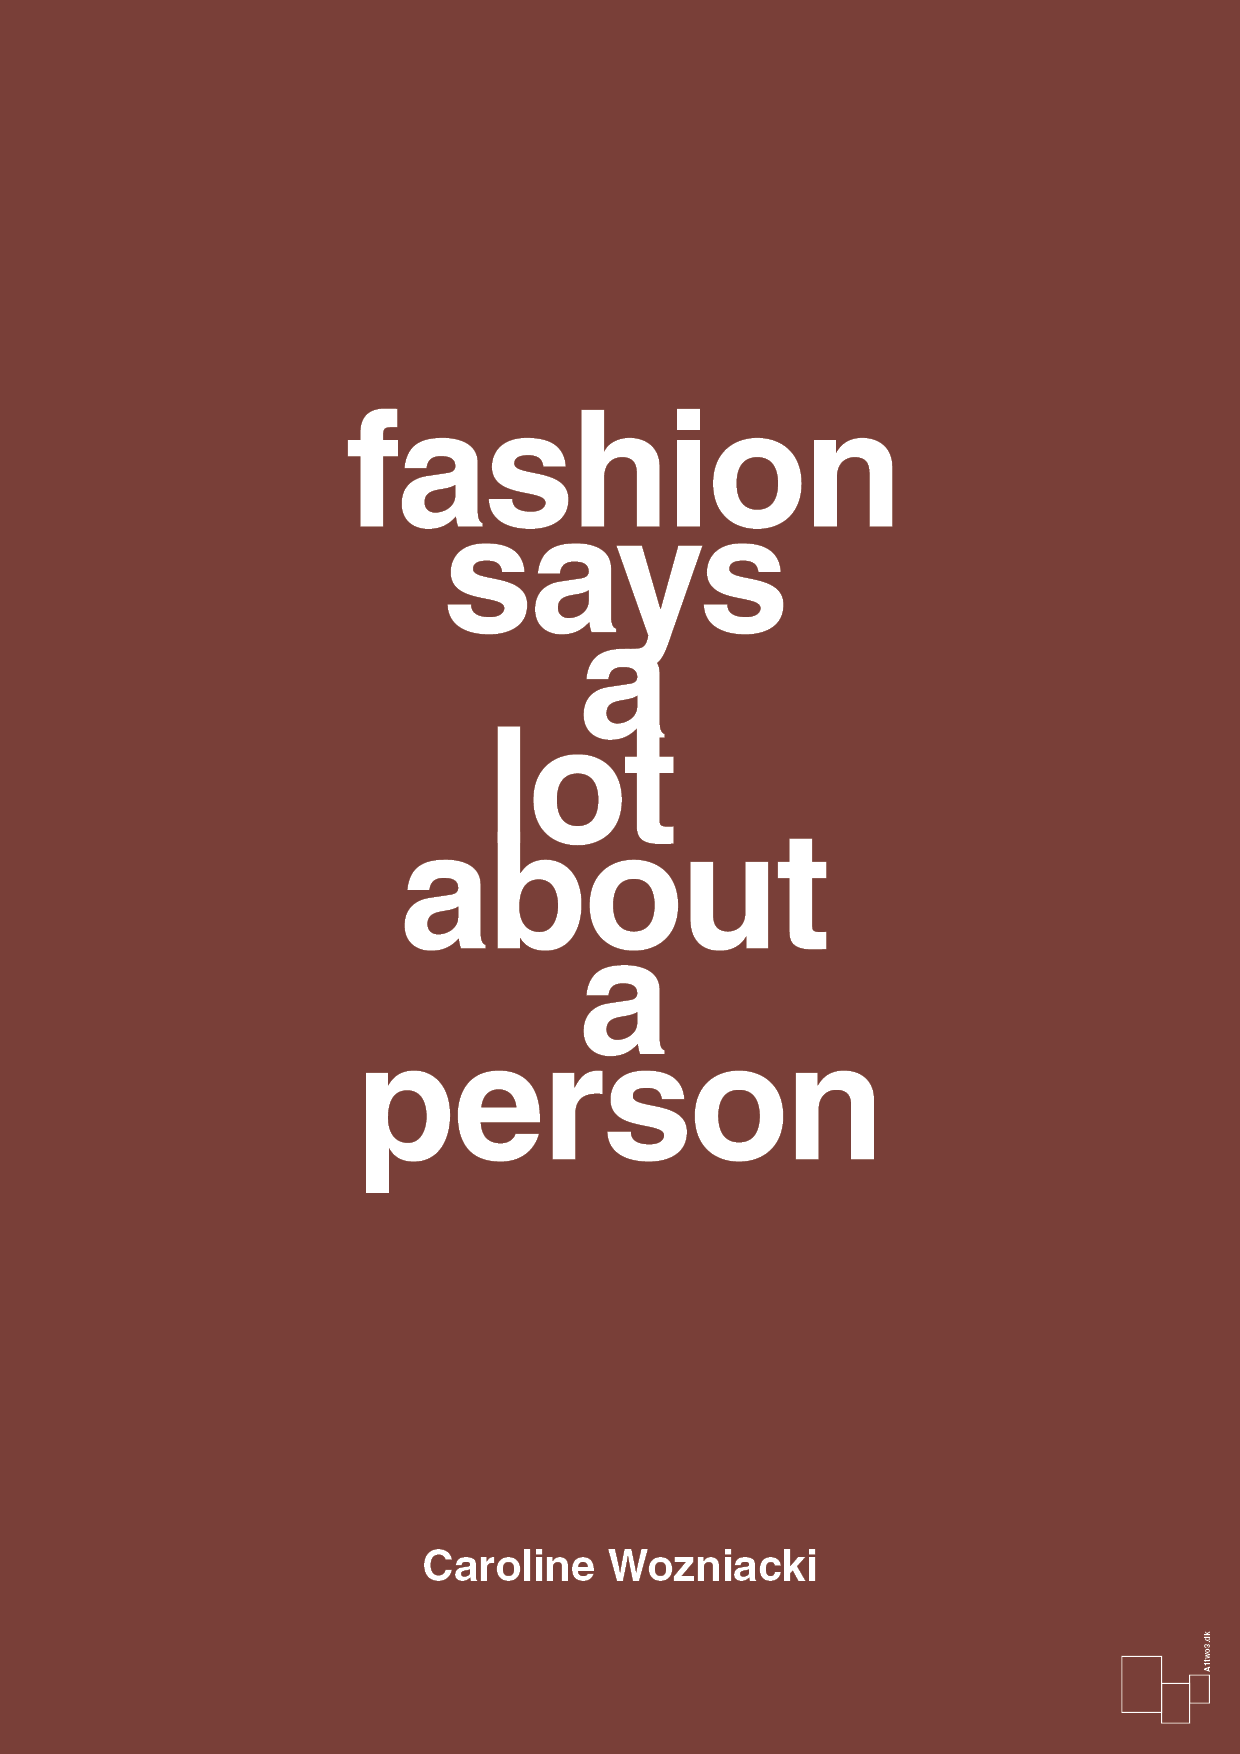 fashion says a lot about a person - Plakat med Citater i Red Pepper